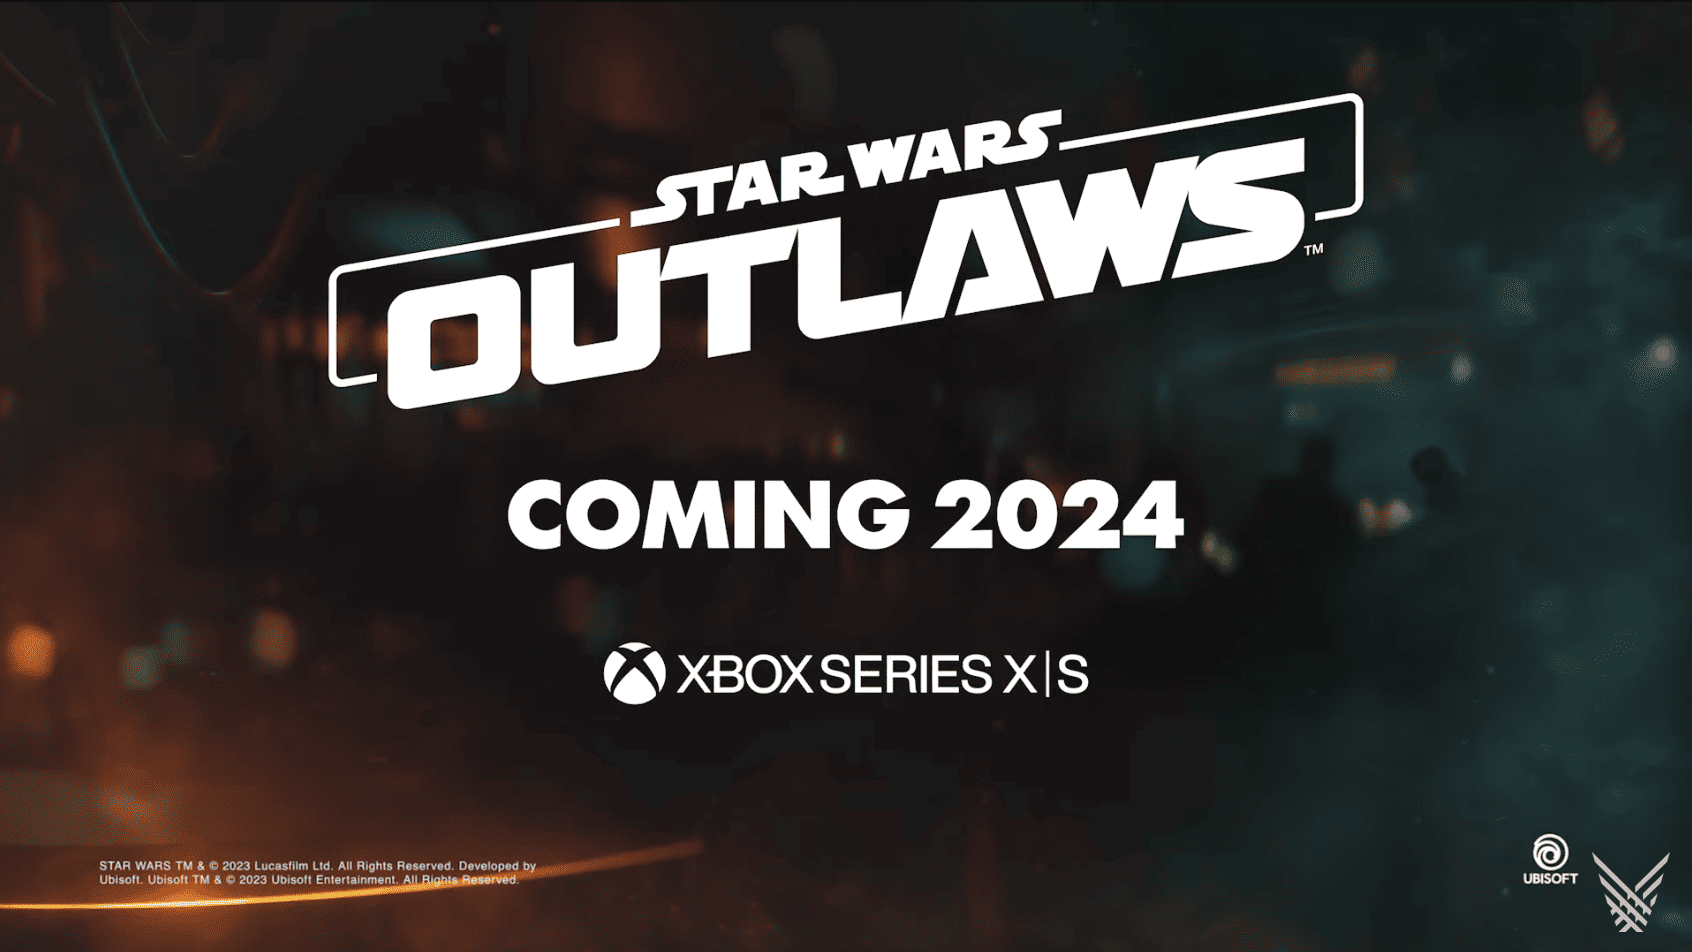 Is Star Wars Outlaws multiplayer?